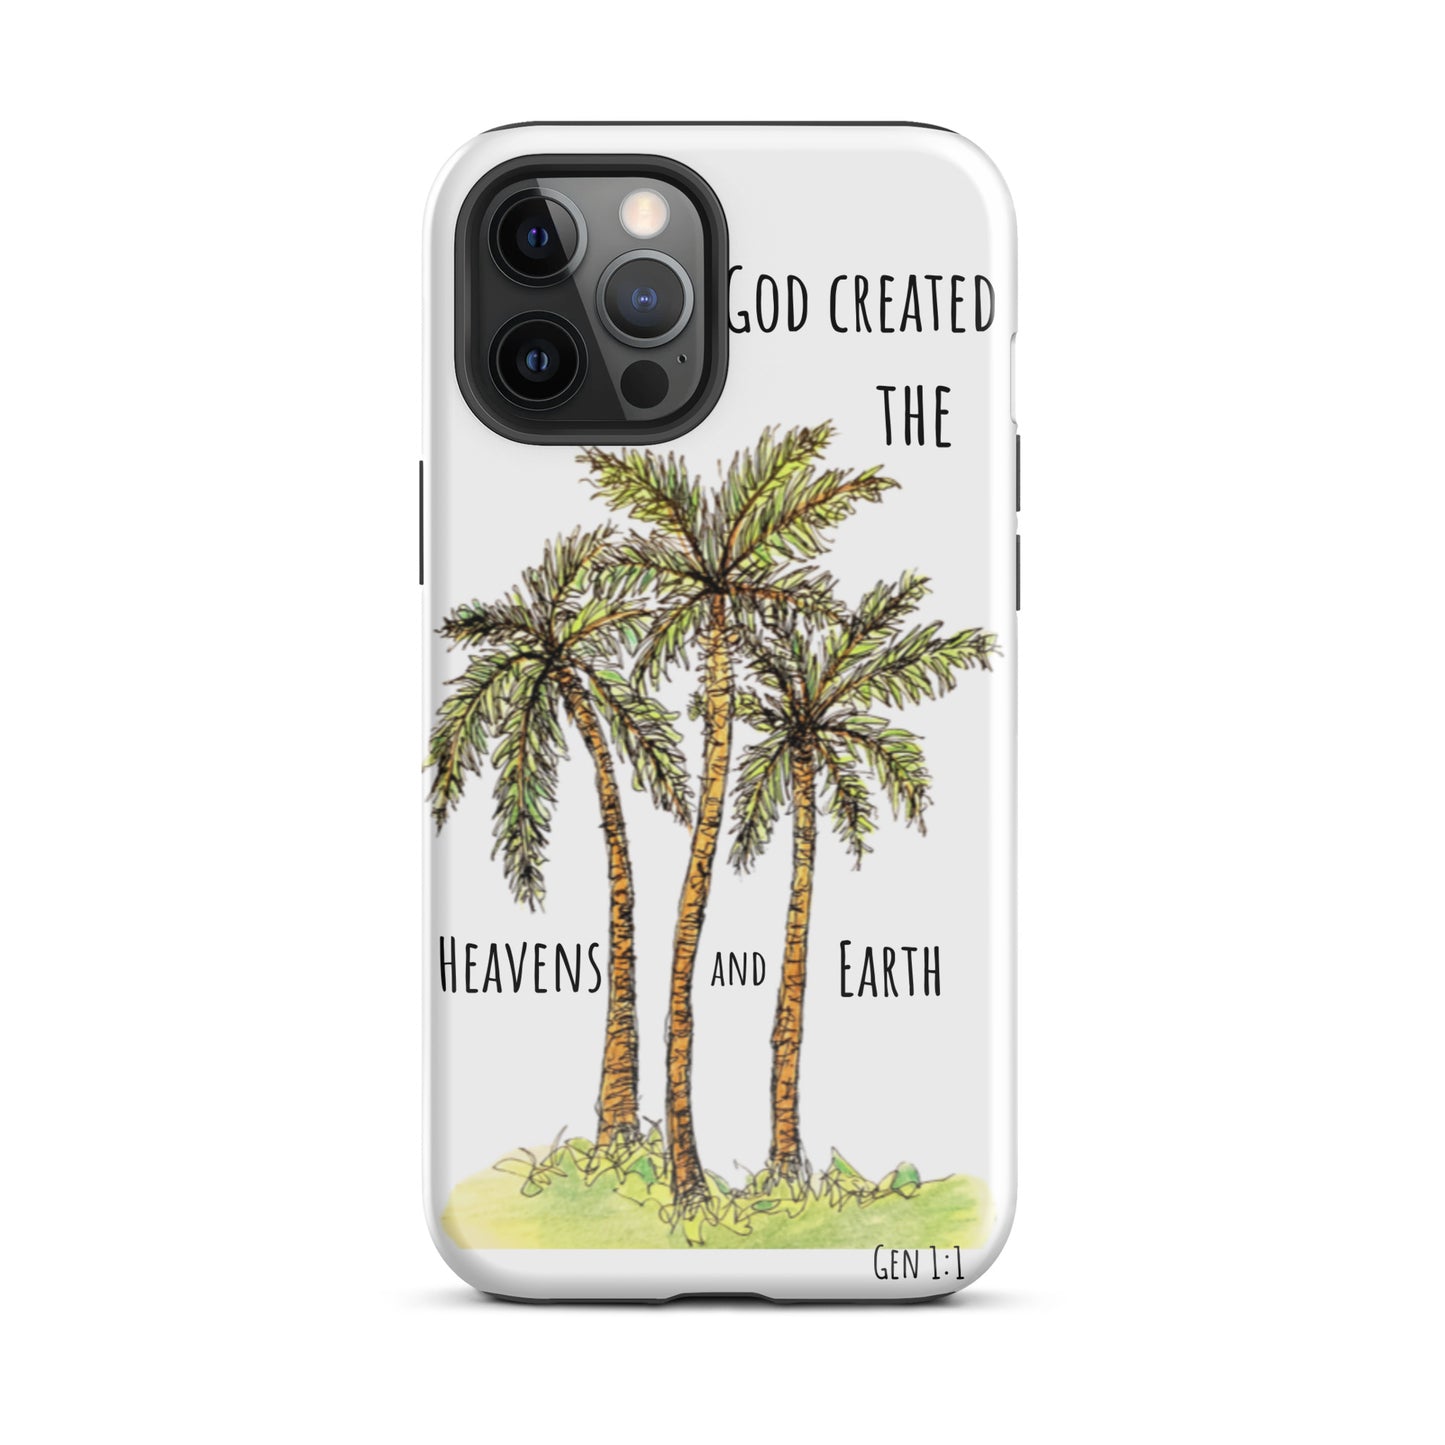 God Said "In the Beginning" Phone case